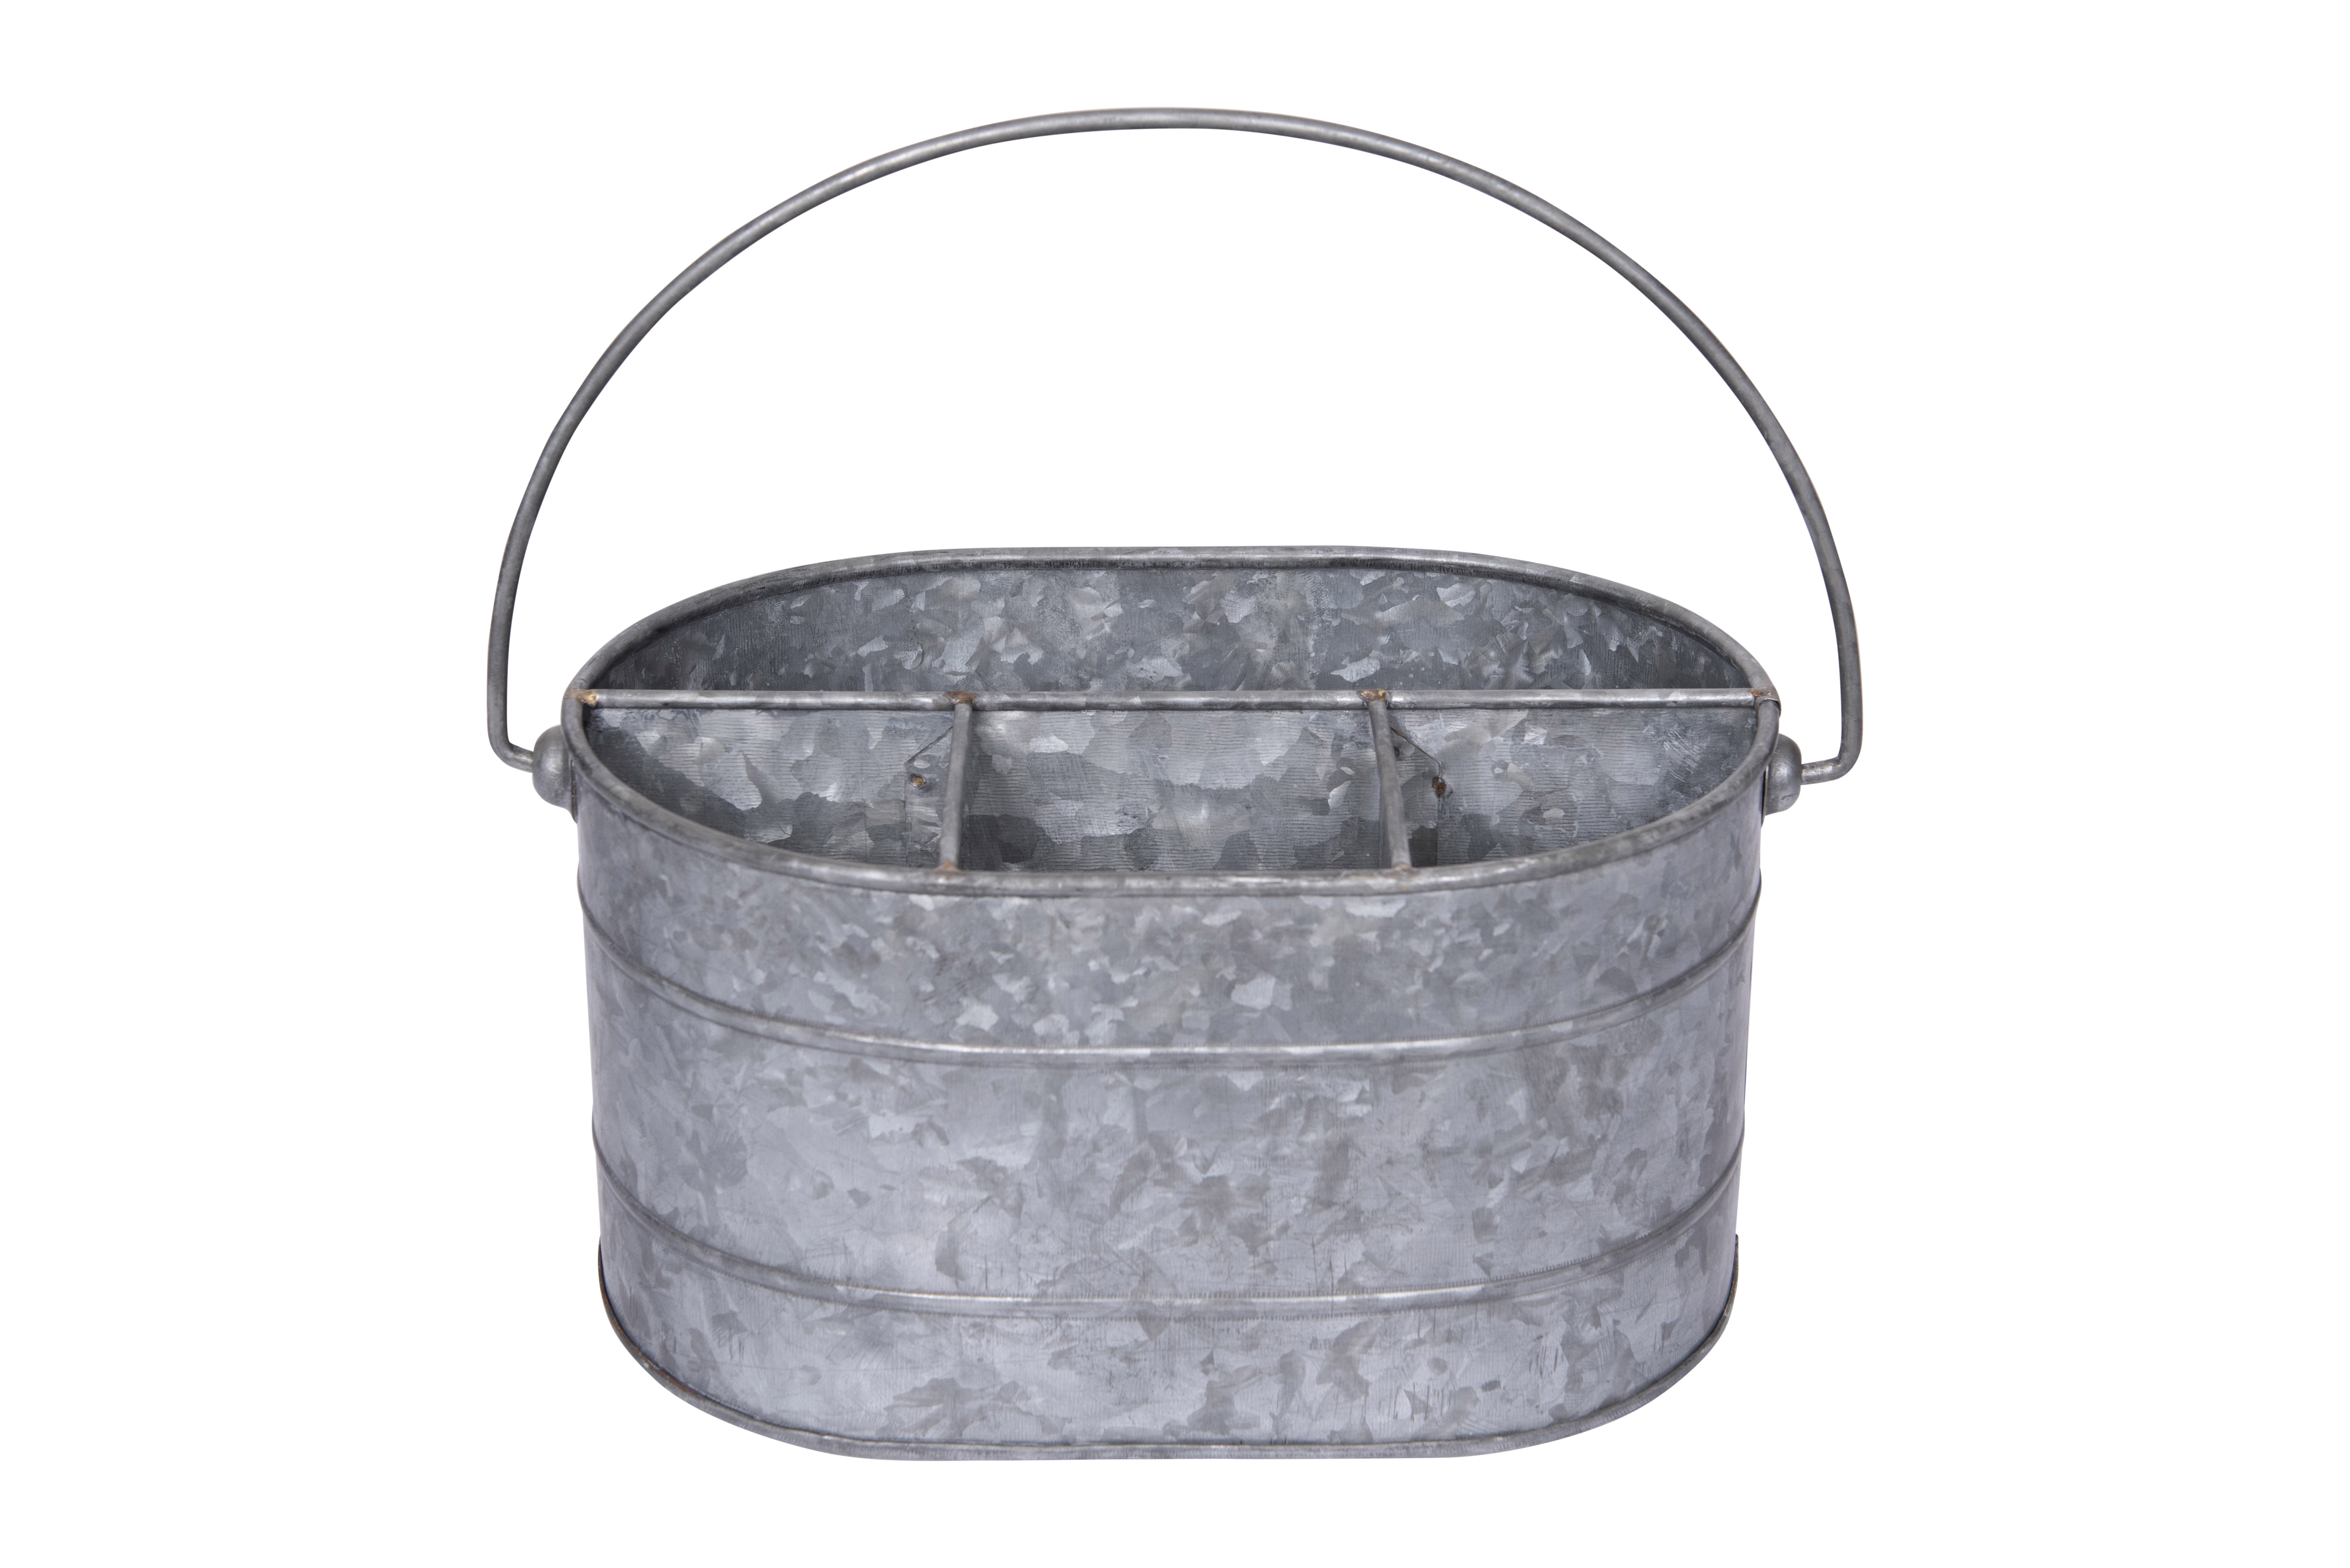 Woven Paths Galvanized Metal Caddy with 4 Compartments and Handle, Zinc ...